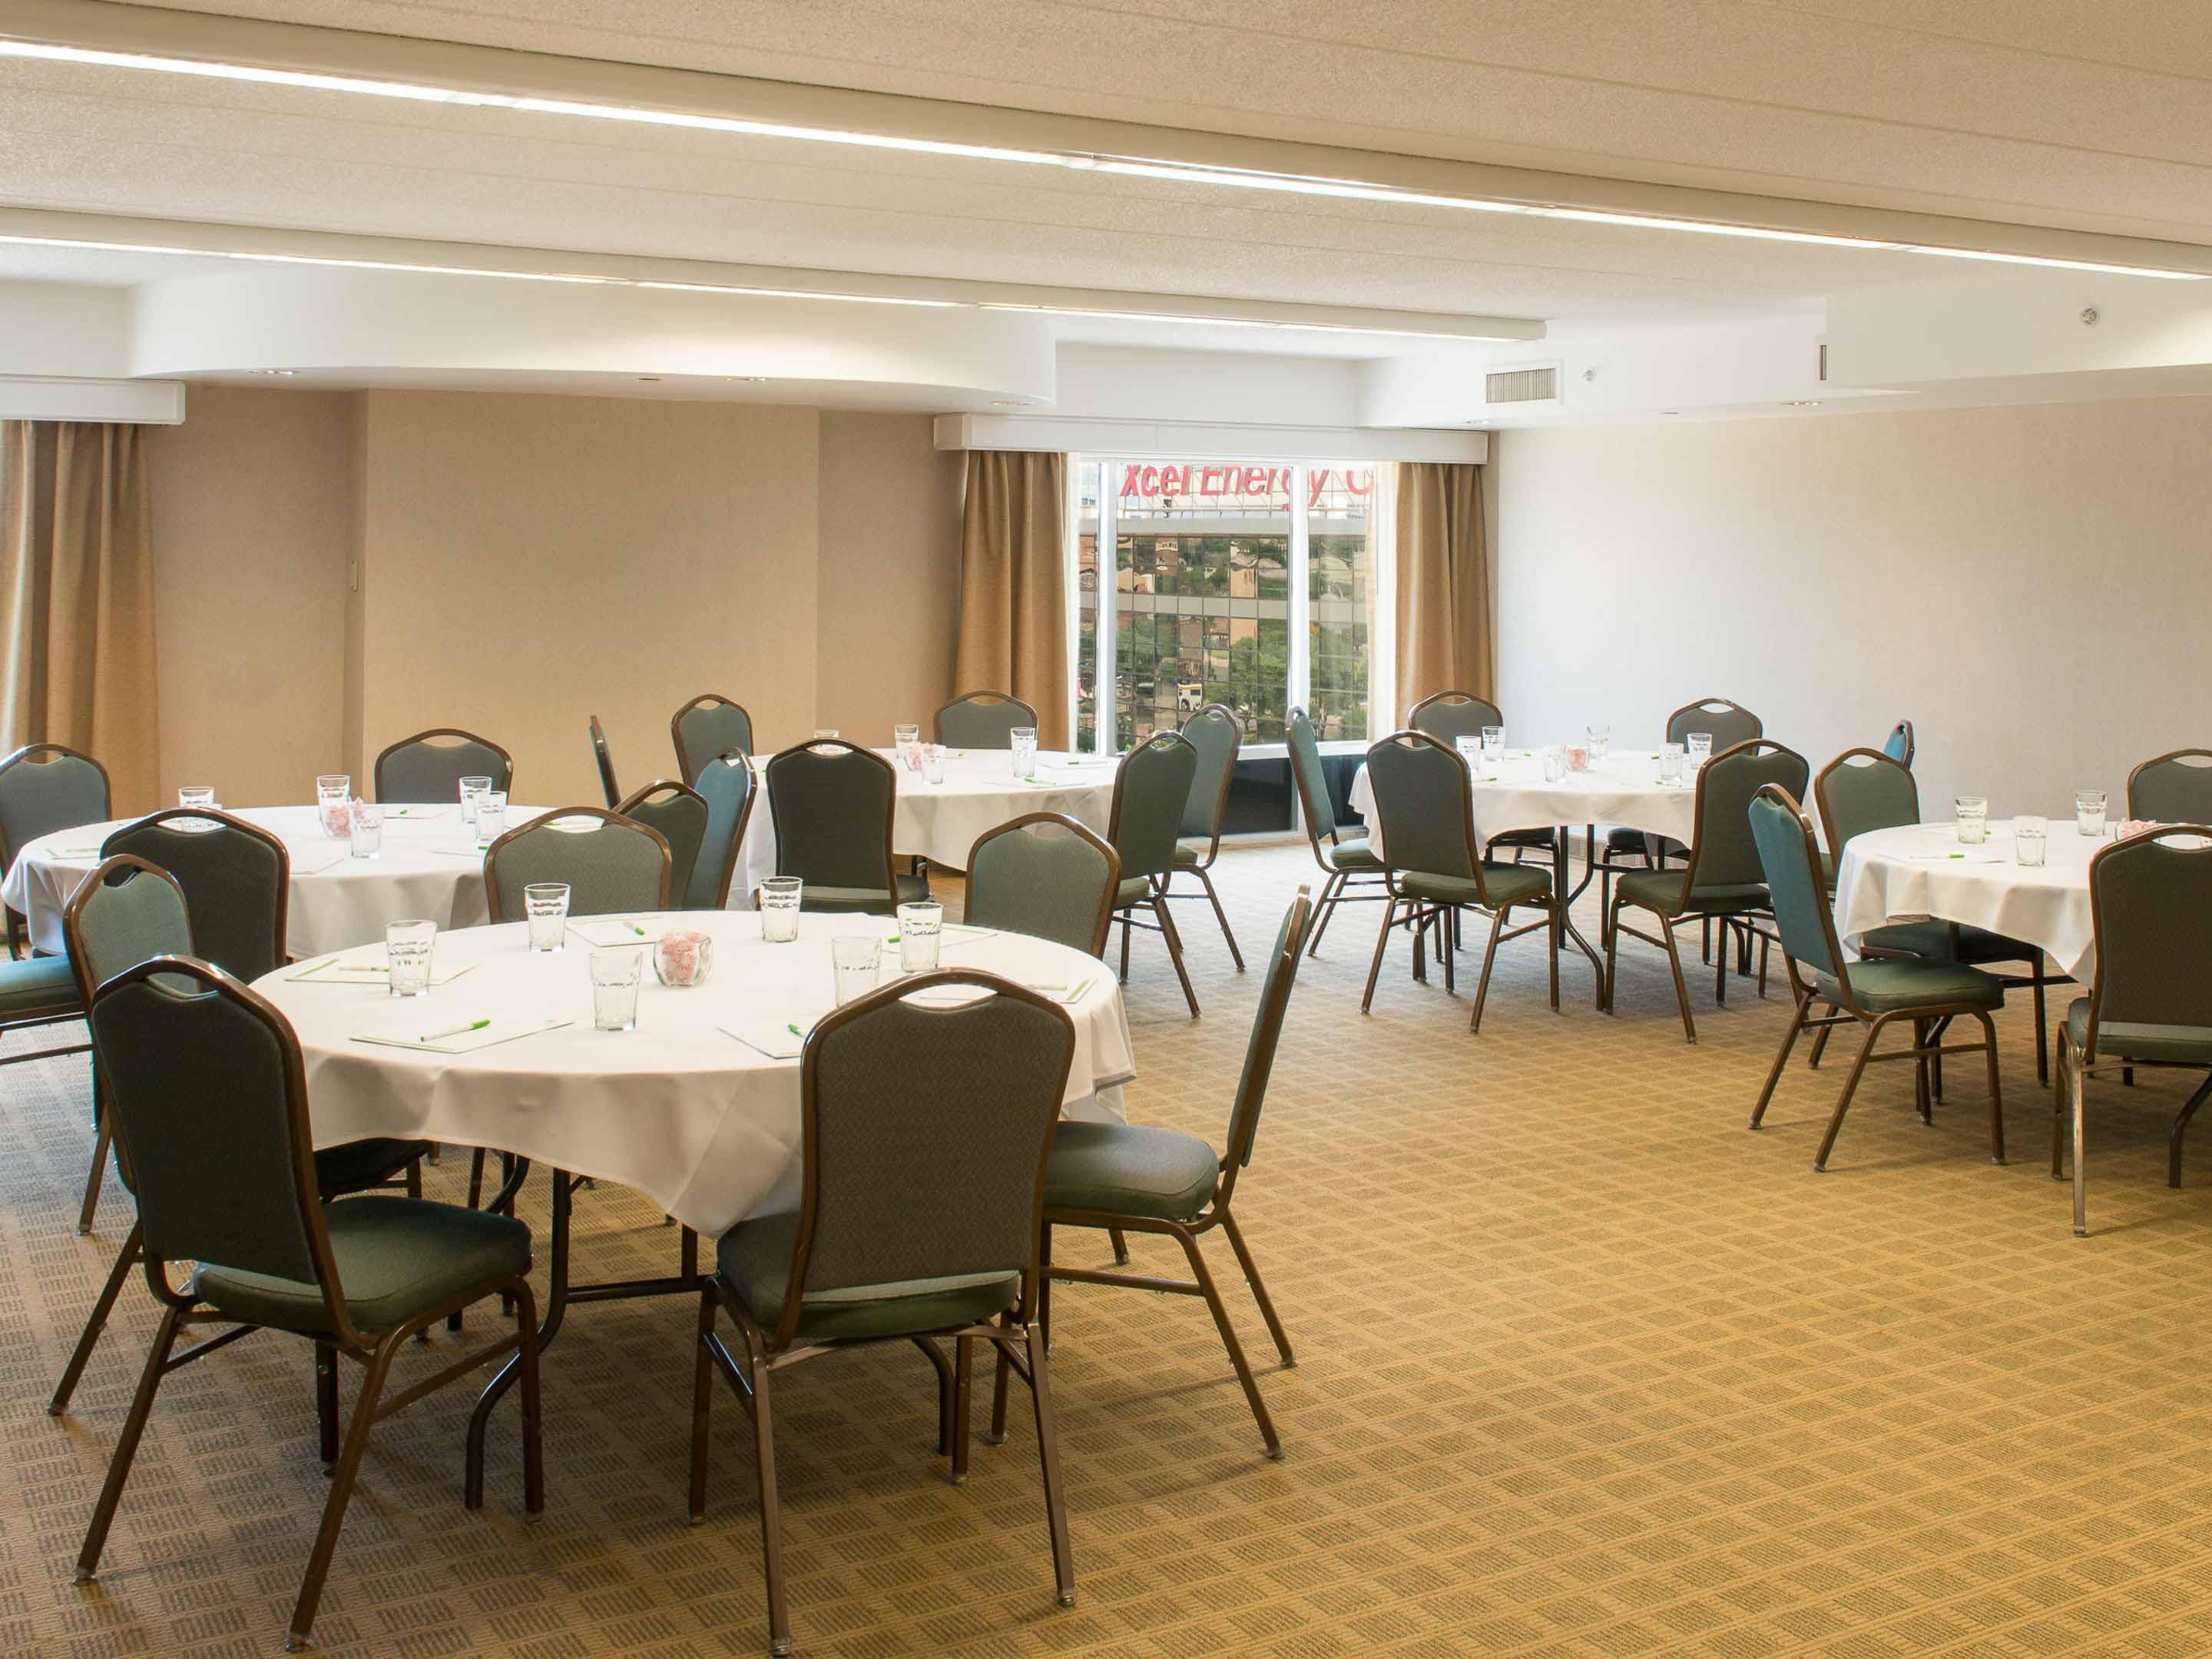 We offer 1,992 square feet of flexible meeting space for your wedding, event, or conference. Let us handle the catering so you can relax and enjoy!